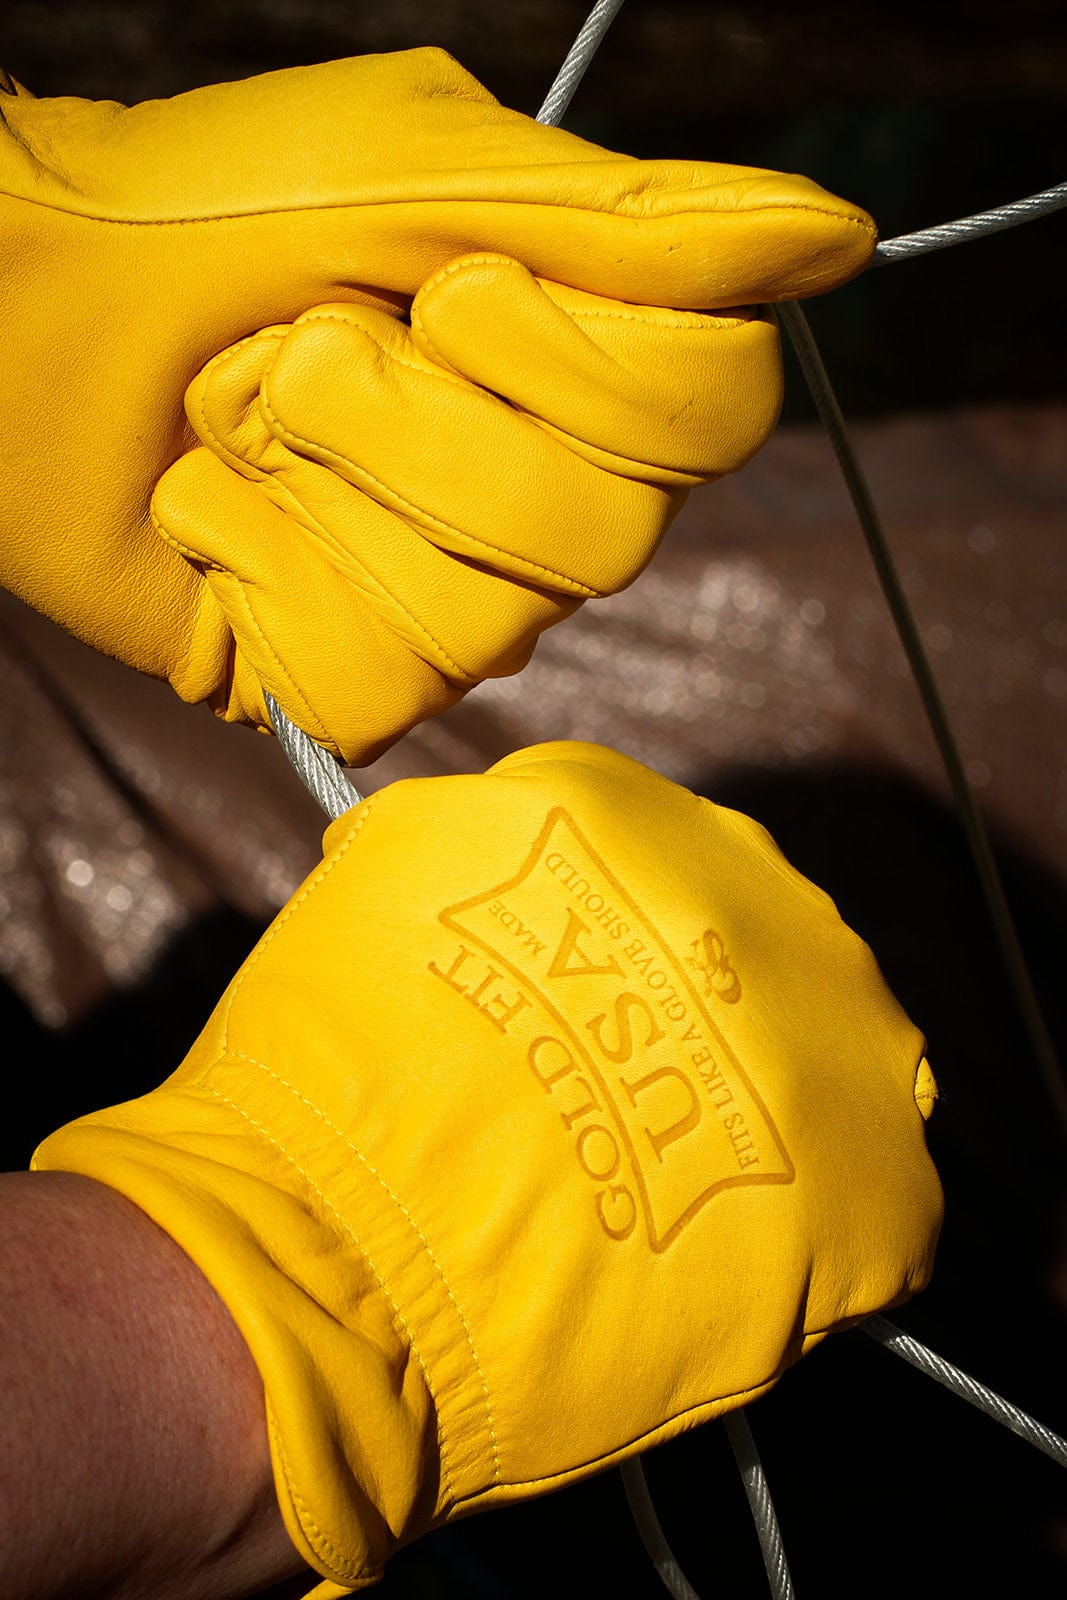 Made in the USA Leather Work Glove 250 Golden Stag Gloves